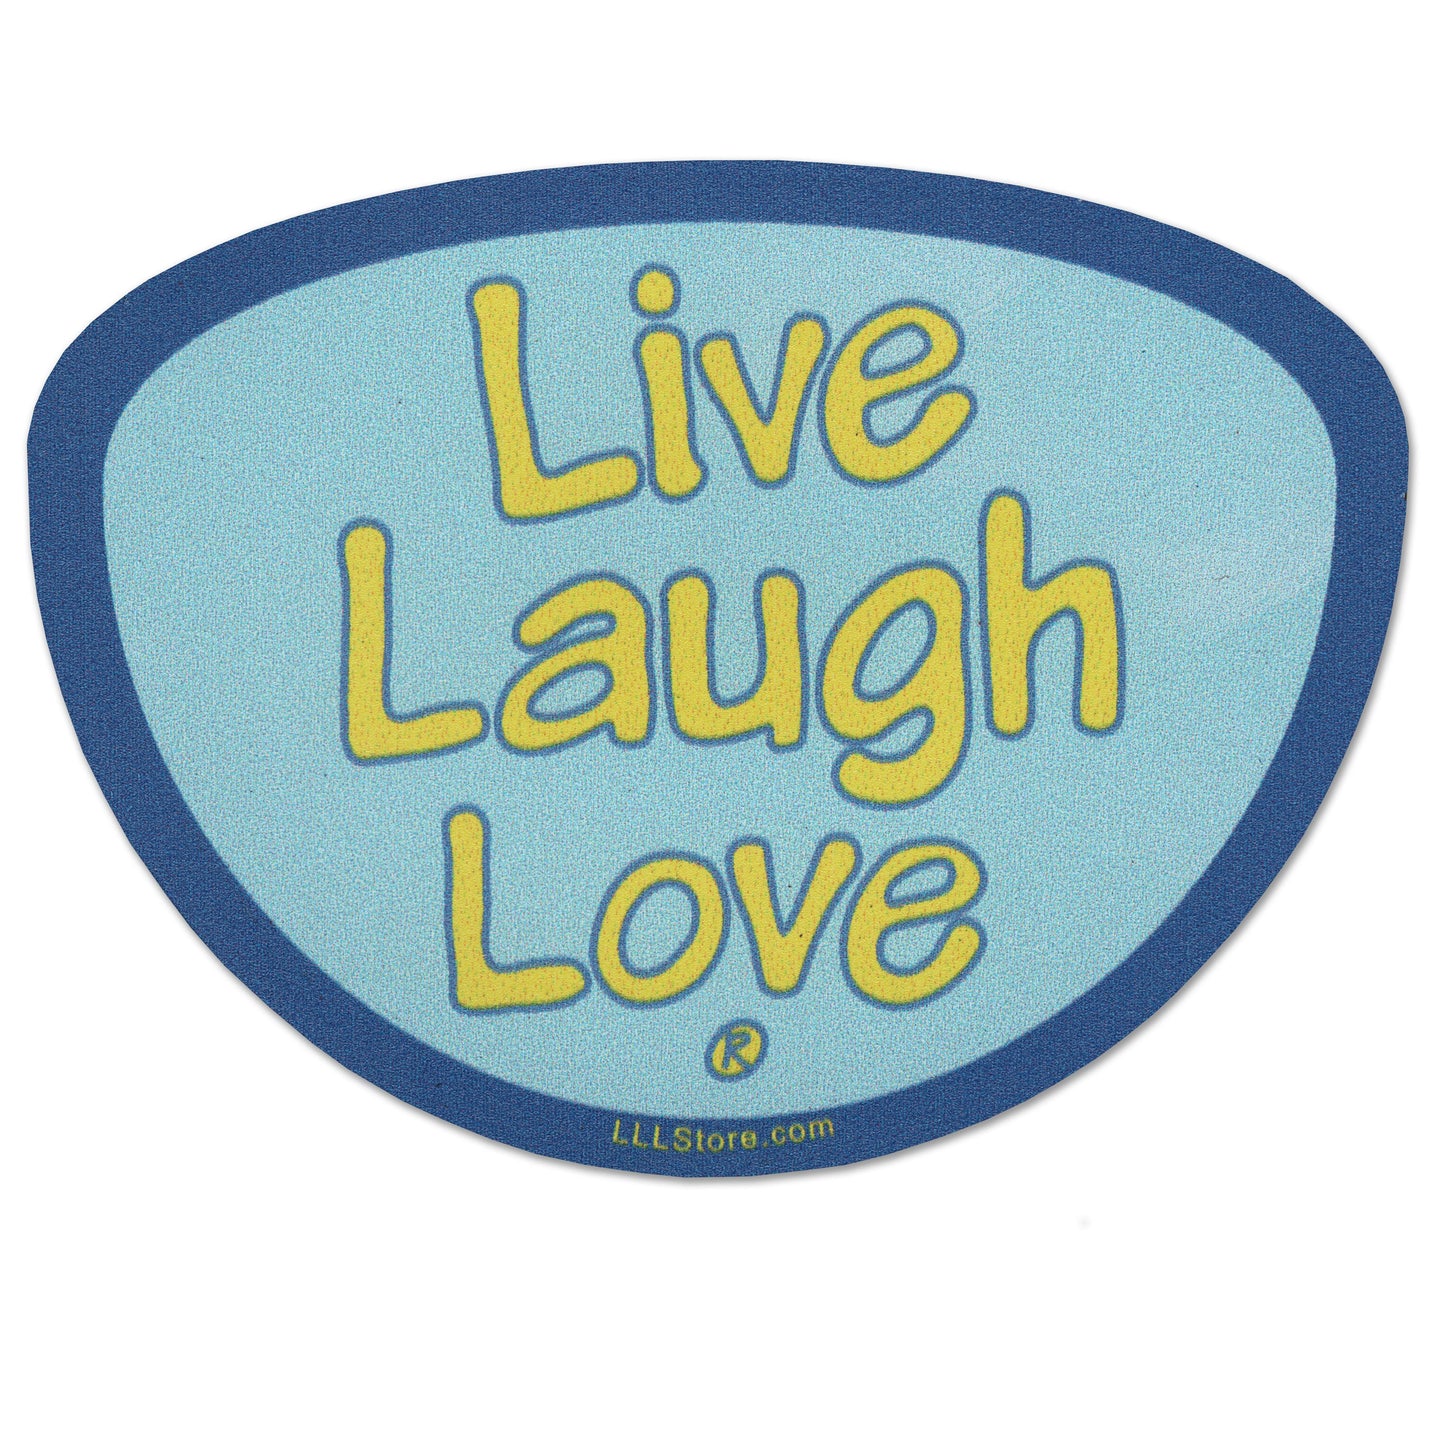 Live Laugh Love® Decorative Message Magnet - Yellow on Turquoise